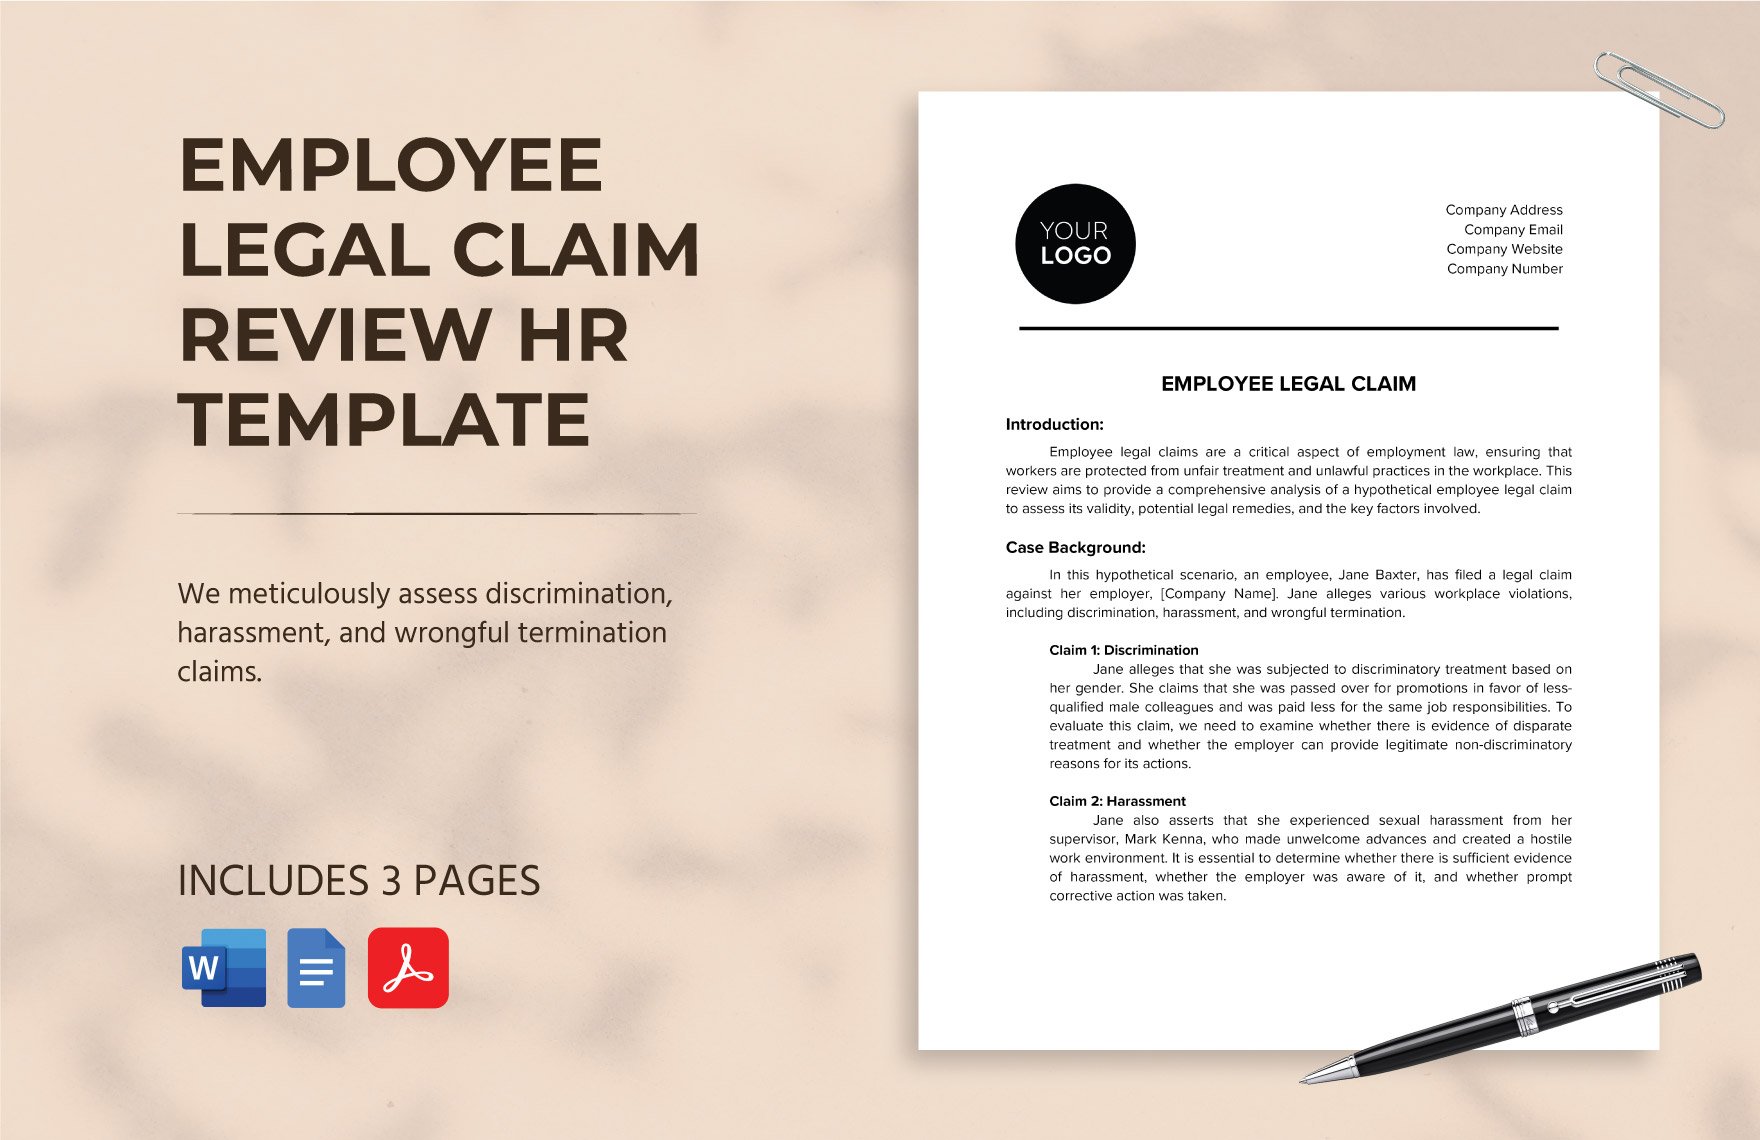 Employee Legal Claim Review HR Template